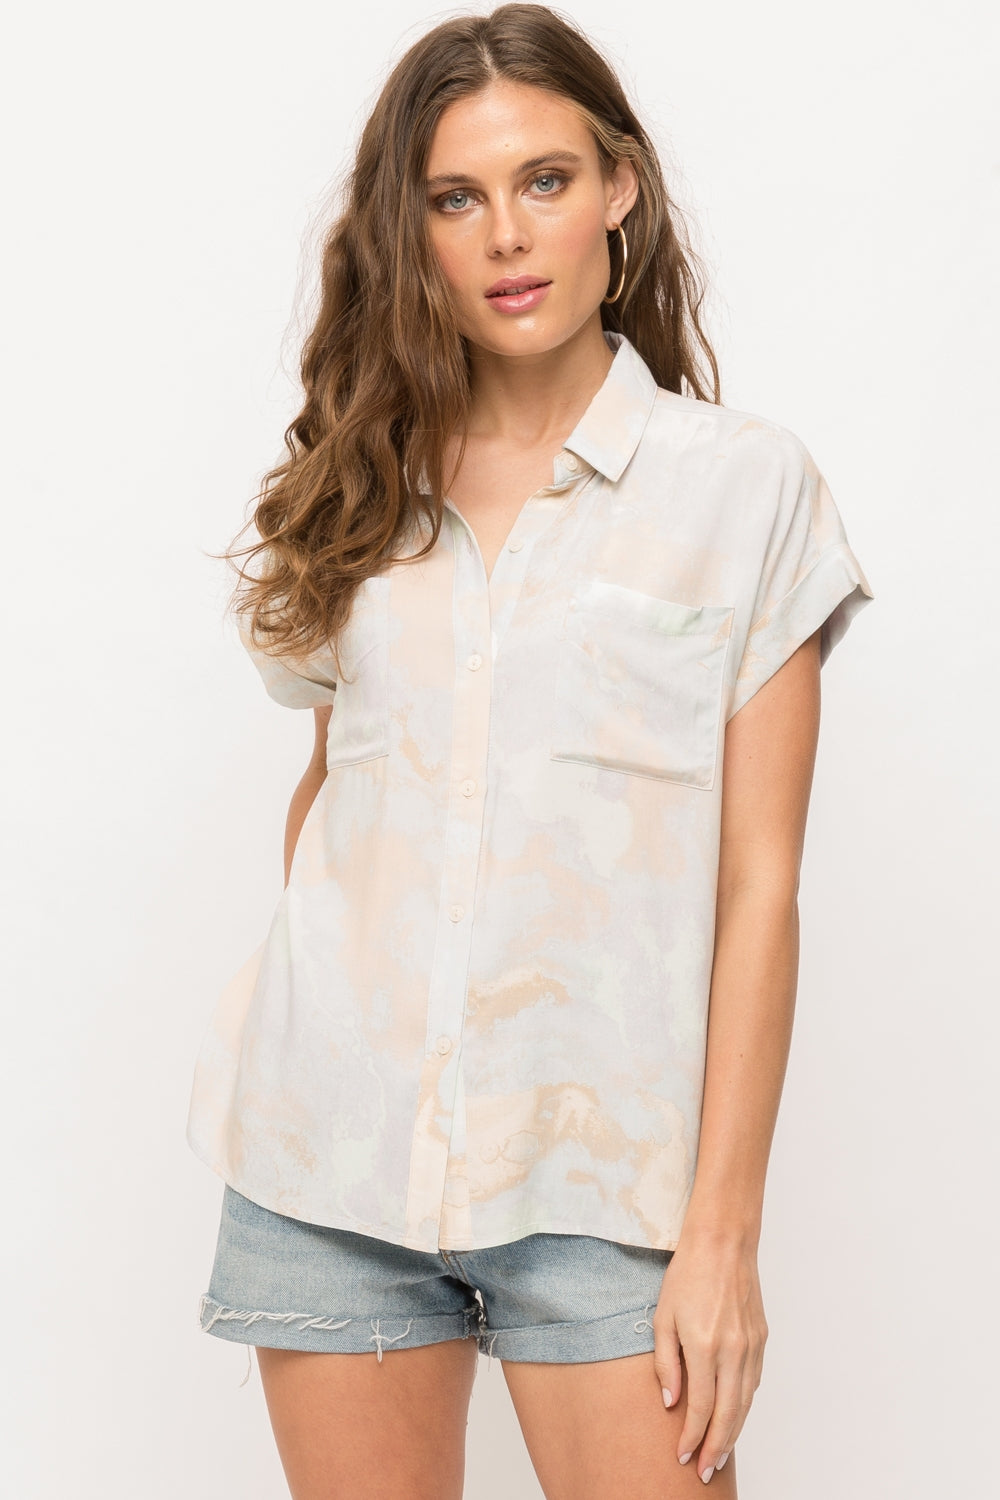 Tie dye print button down shirt with pockets